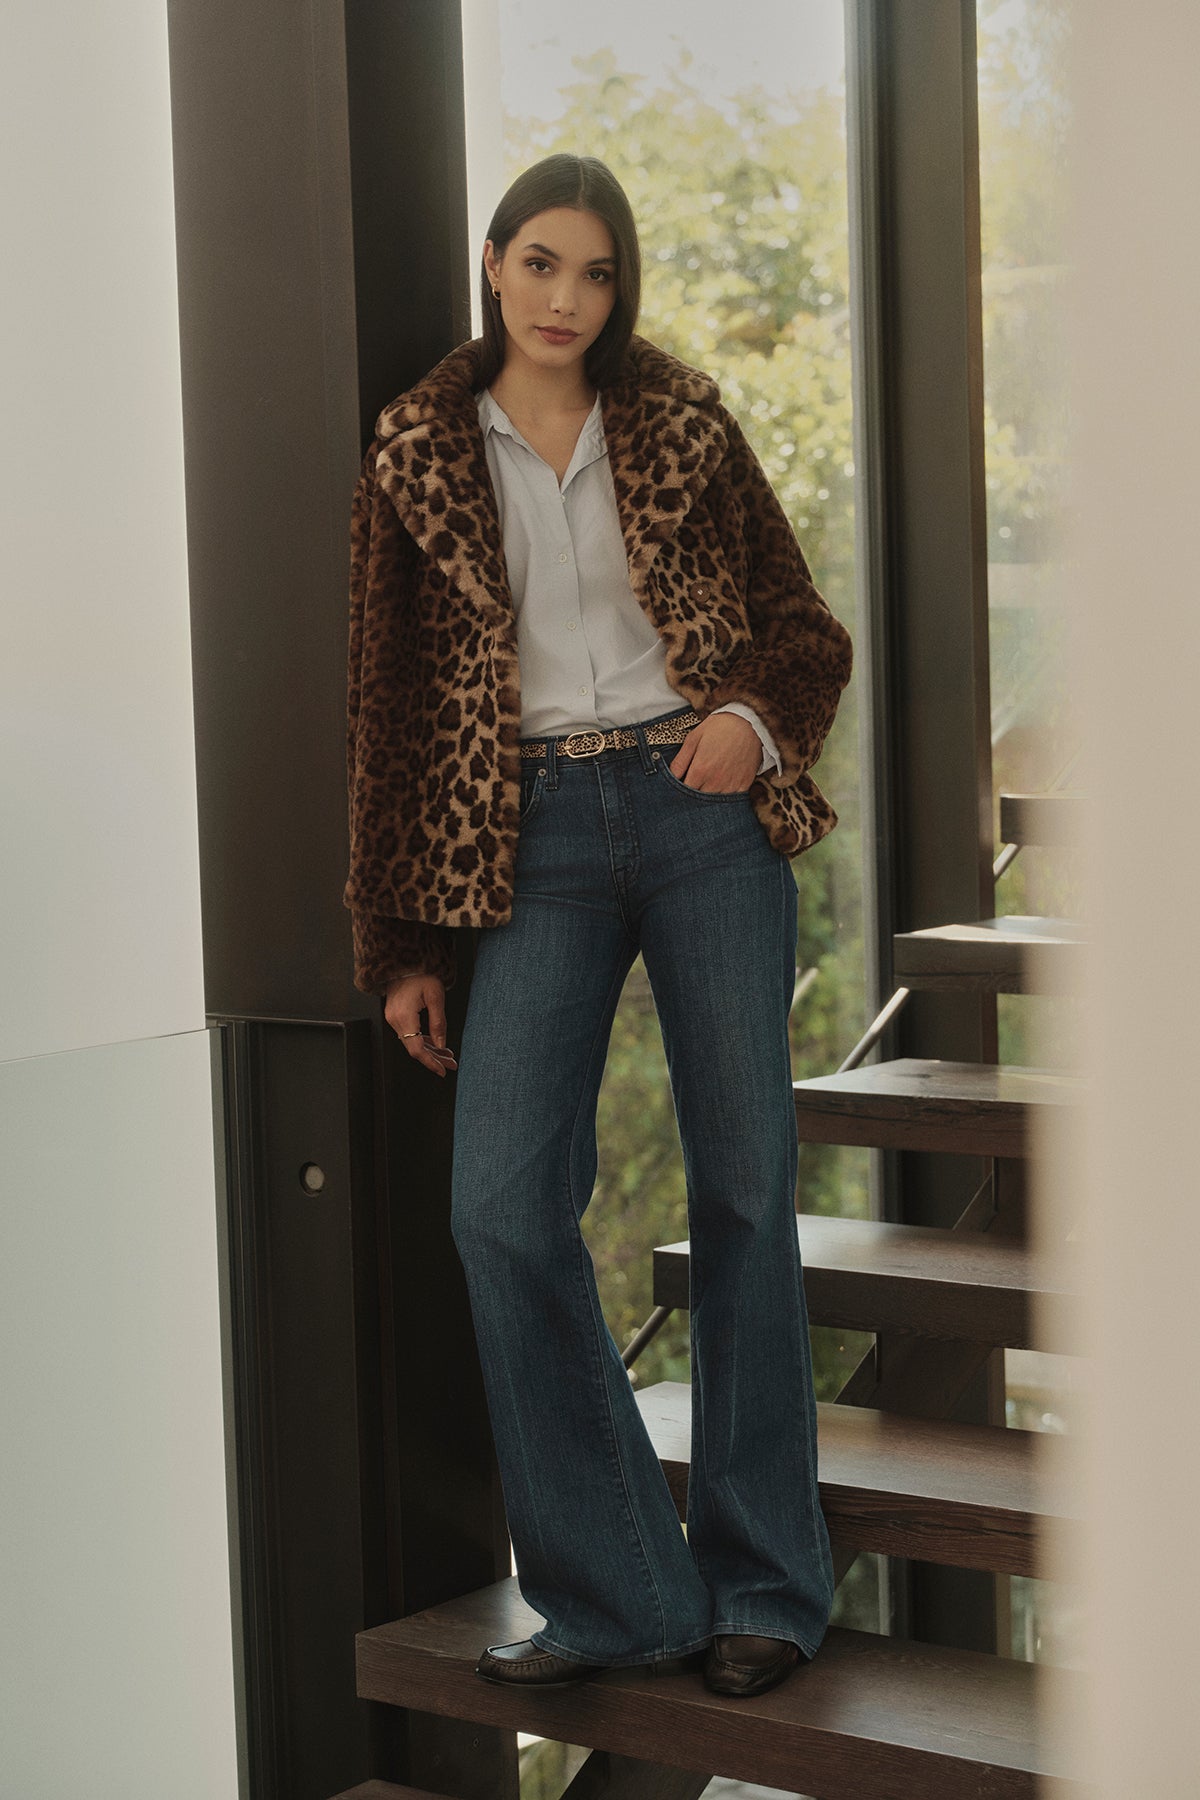 A woman standing on a staircase, wearing the AMANI LEOPARD LUX FAUX FUR JACKET by Velvet by Graham & Spencer, a white blouse, and flared jeans, with sunlight filtering through large windows in the background. The ensemble is a perfect addition to any fall wardrobe.-35766170288321